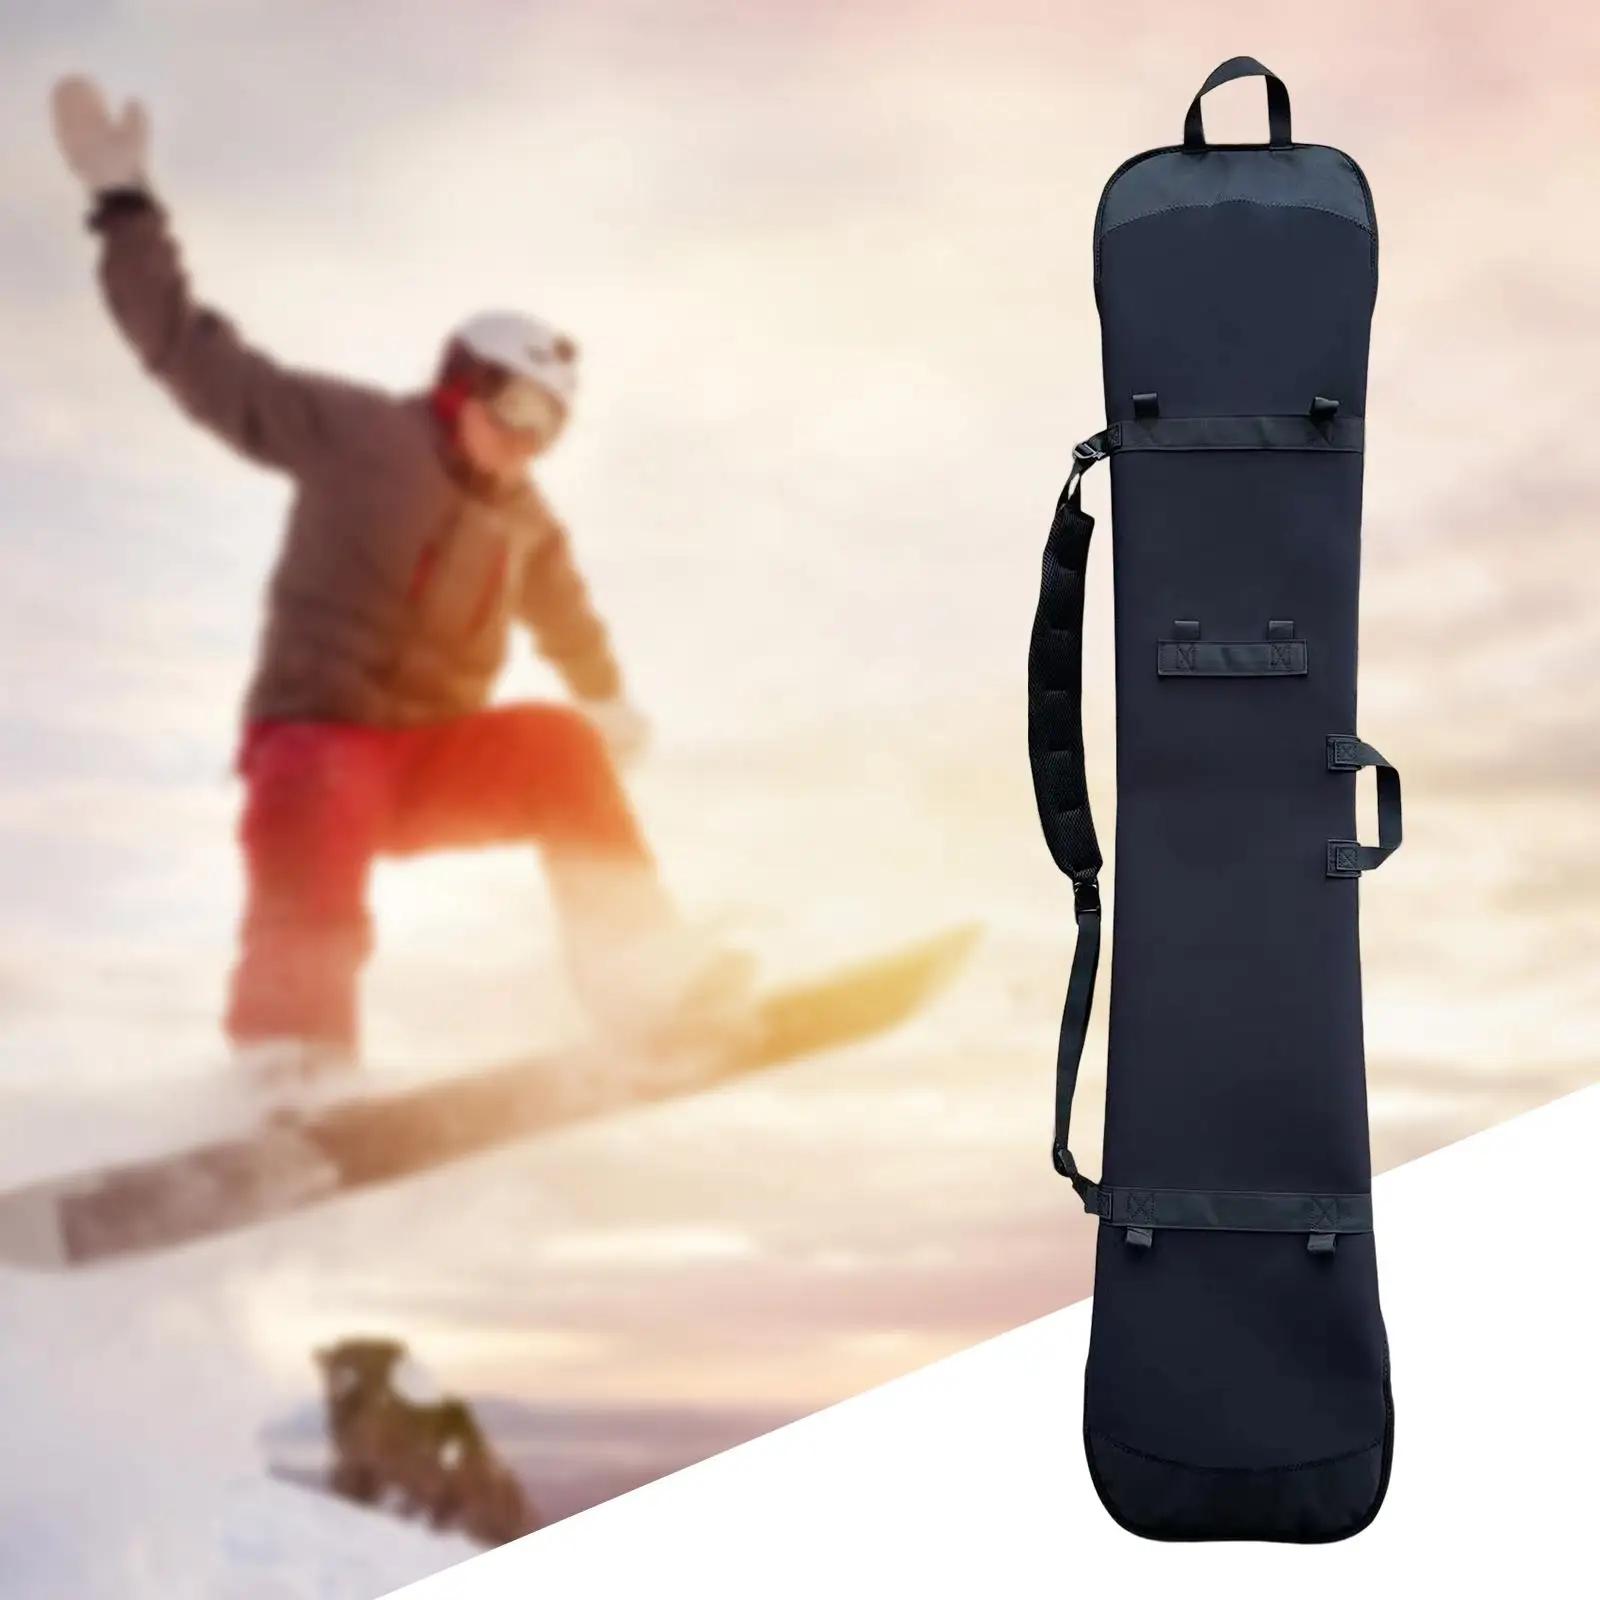 Protection Premium Sleeve Transport Wrap 153cm Carrying Luggage Snowboard Travel Bag Ski Storage Case for Skiing Outdoor Sports